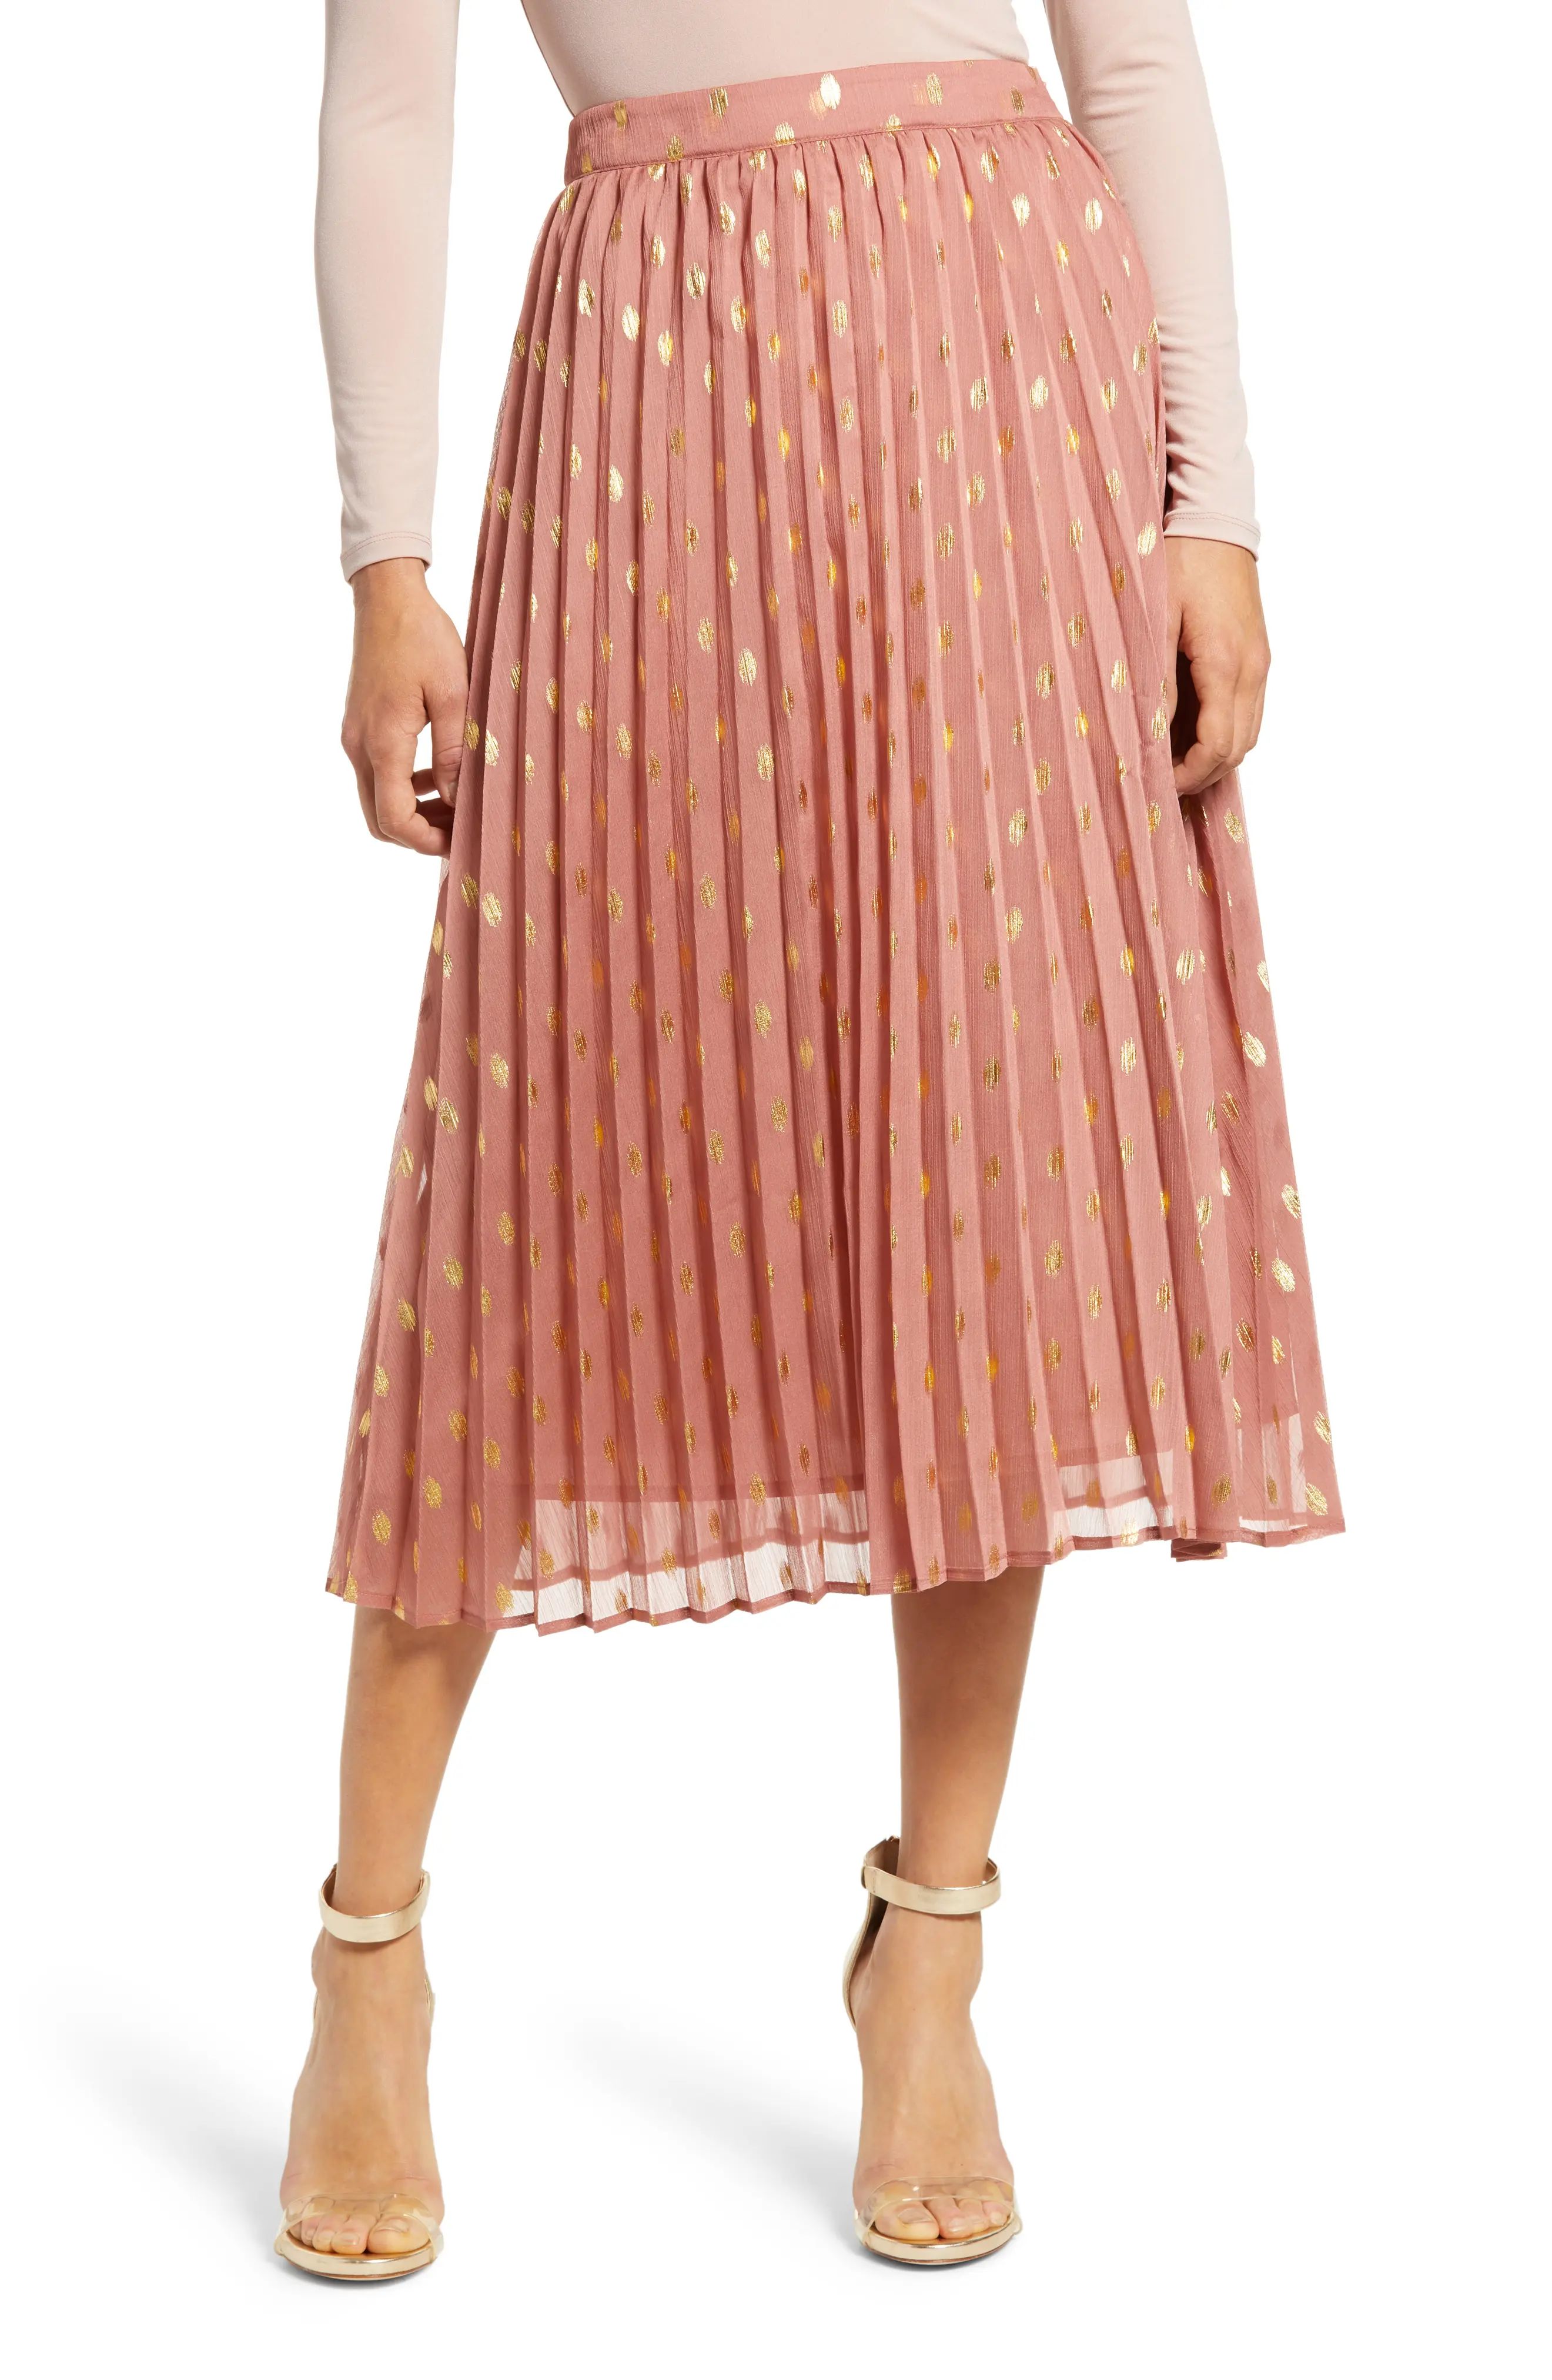 Women's Endless Rose Polka Dot Pleated Skirt, Size Small - Pink | Nordstrom